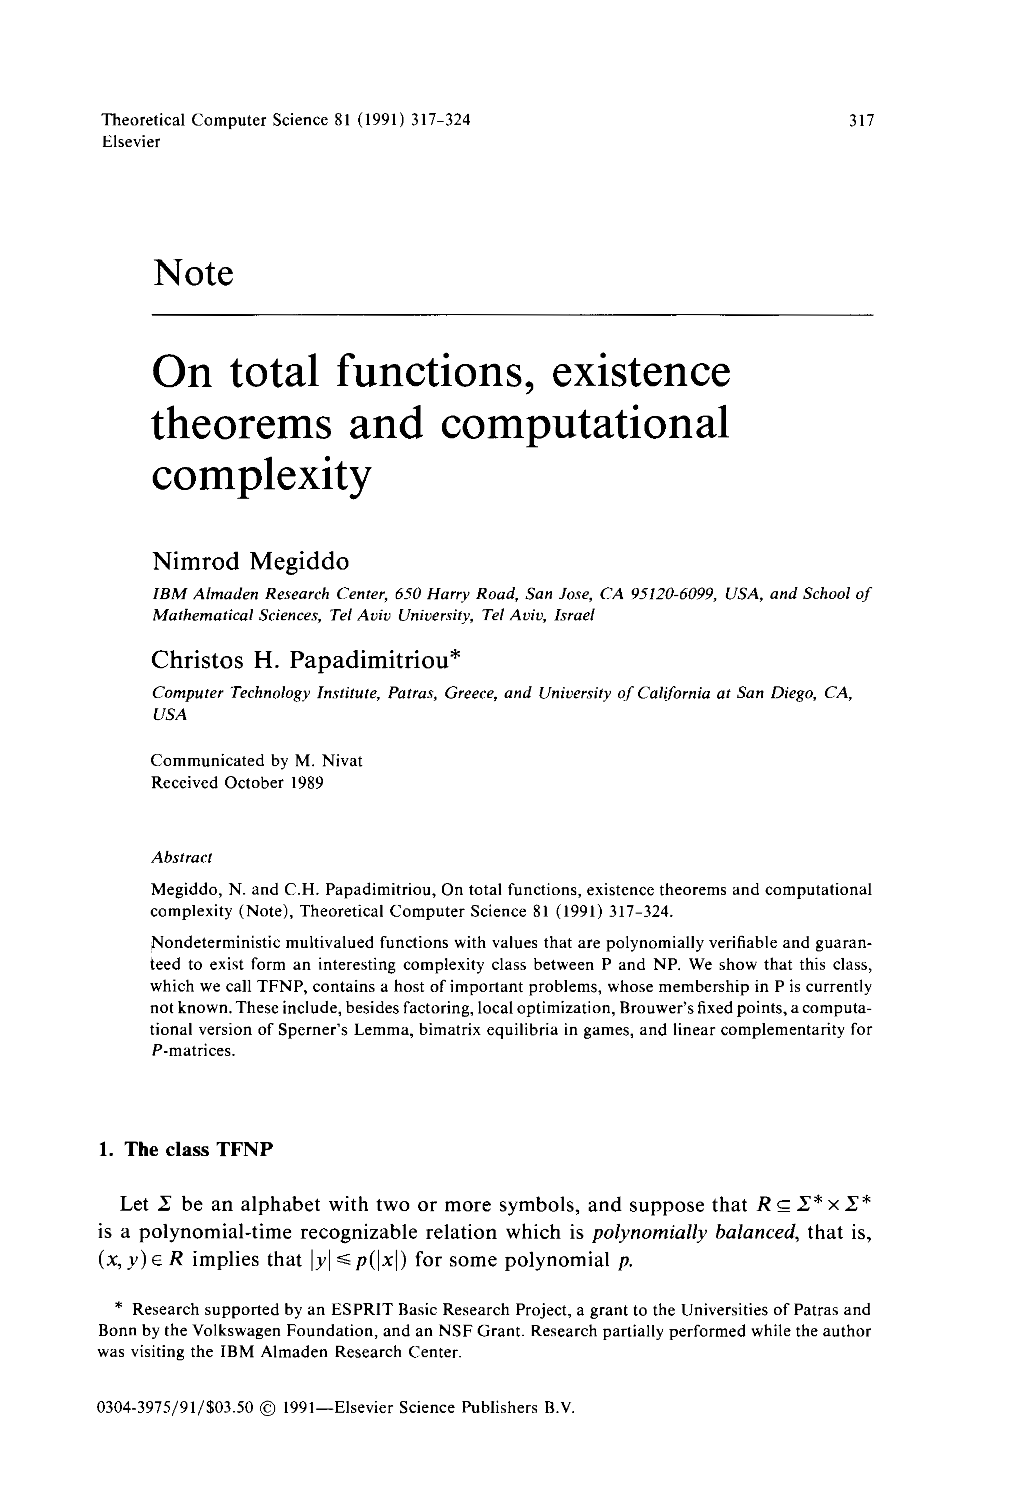 On Total Functions, Existence Theorems and Computational Complexity